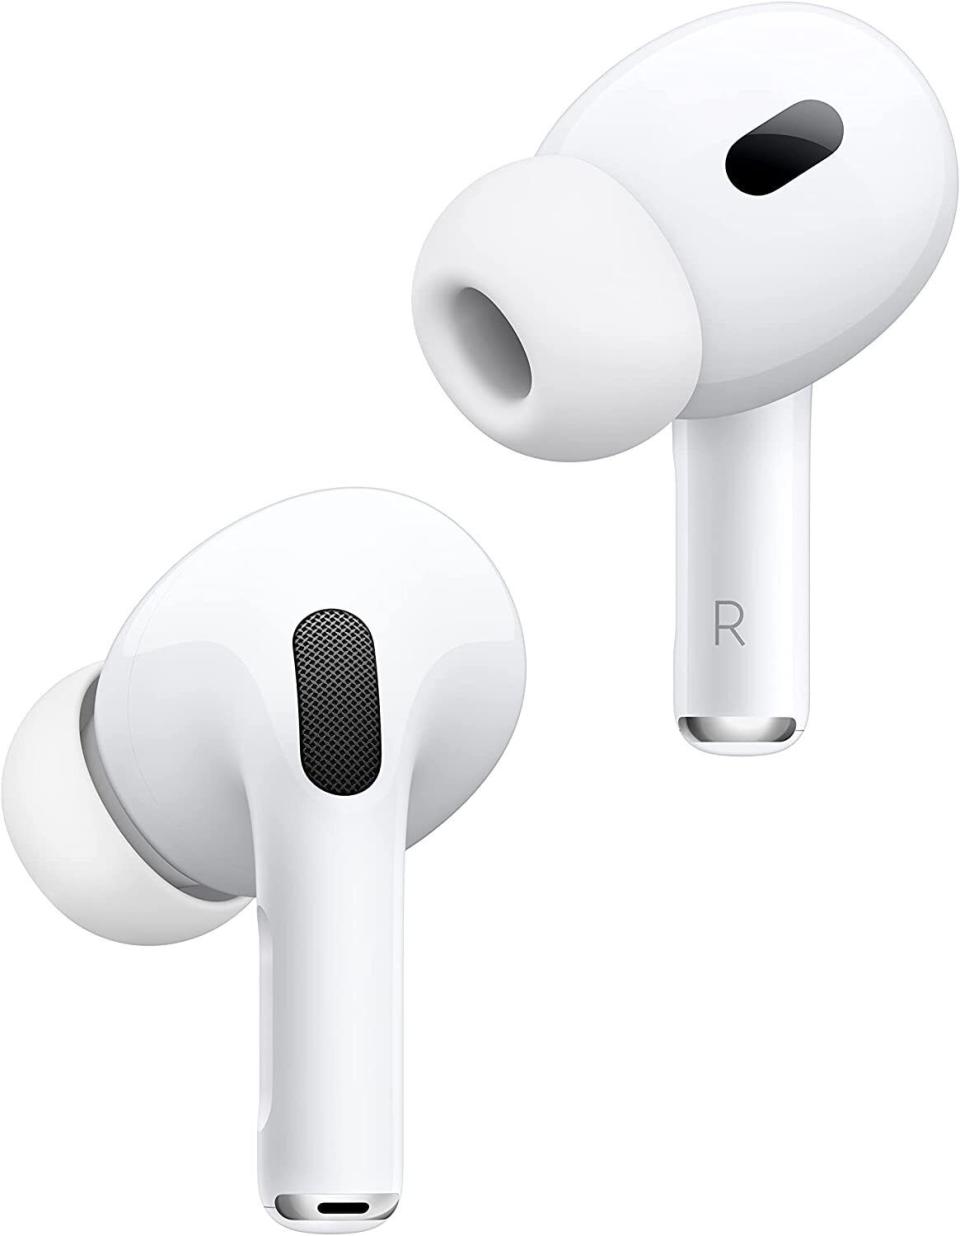 In these top-of-the-line AirPods, the Apple-designed H2 chip offers premium noise cancellation and immersive listening quality. Multiple sizes of silicone tips are also available for increased customization in comfort, and newly sensitive controls allow you to adjust volume and answer calls by merely swiping the AirPod’s stem. This model also offers 33% more battery life than the first-generation model. These popular earbuds are on sale on Cyber Monday for a limited time.$199.99 at Amazon (originally $249)